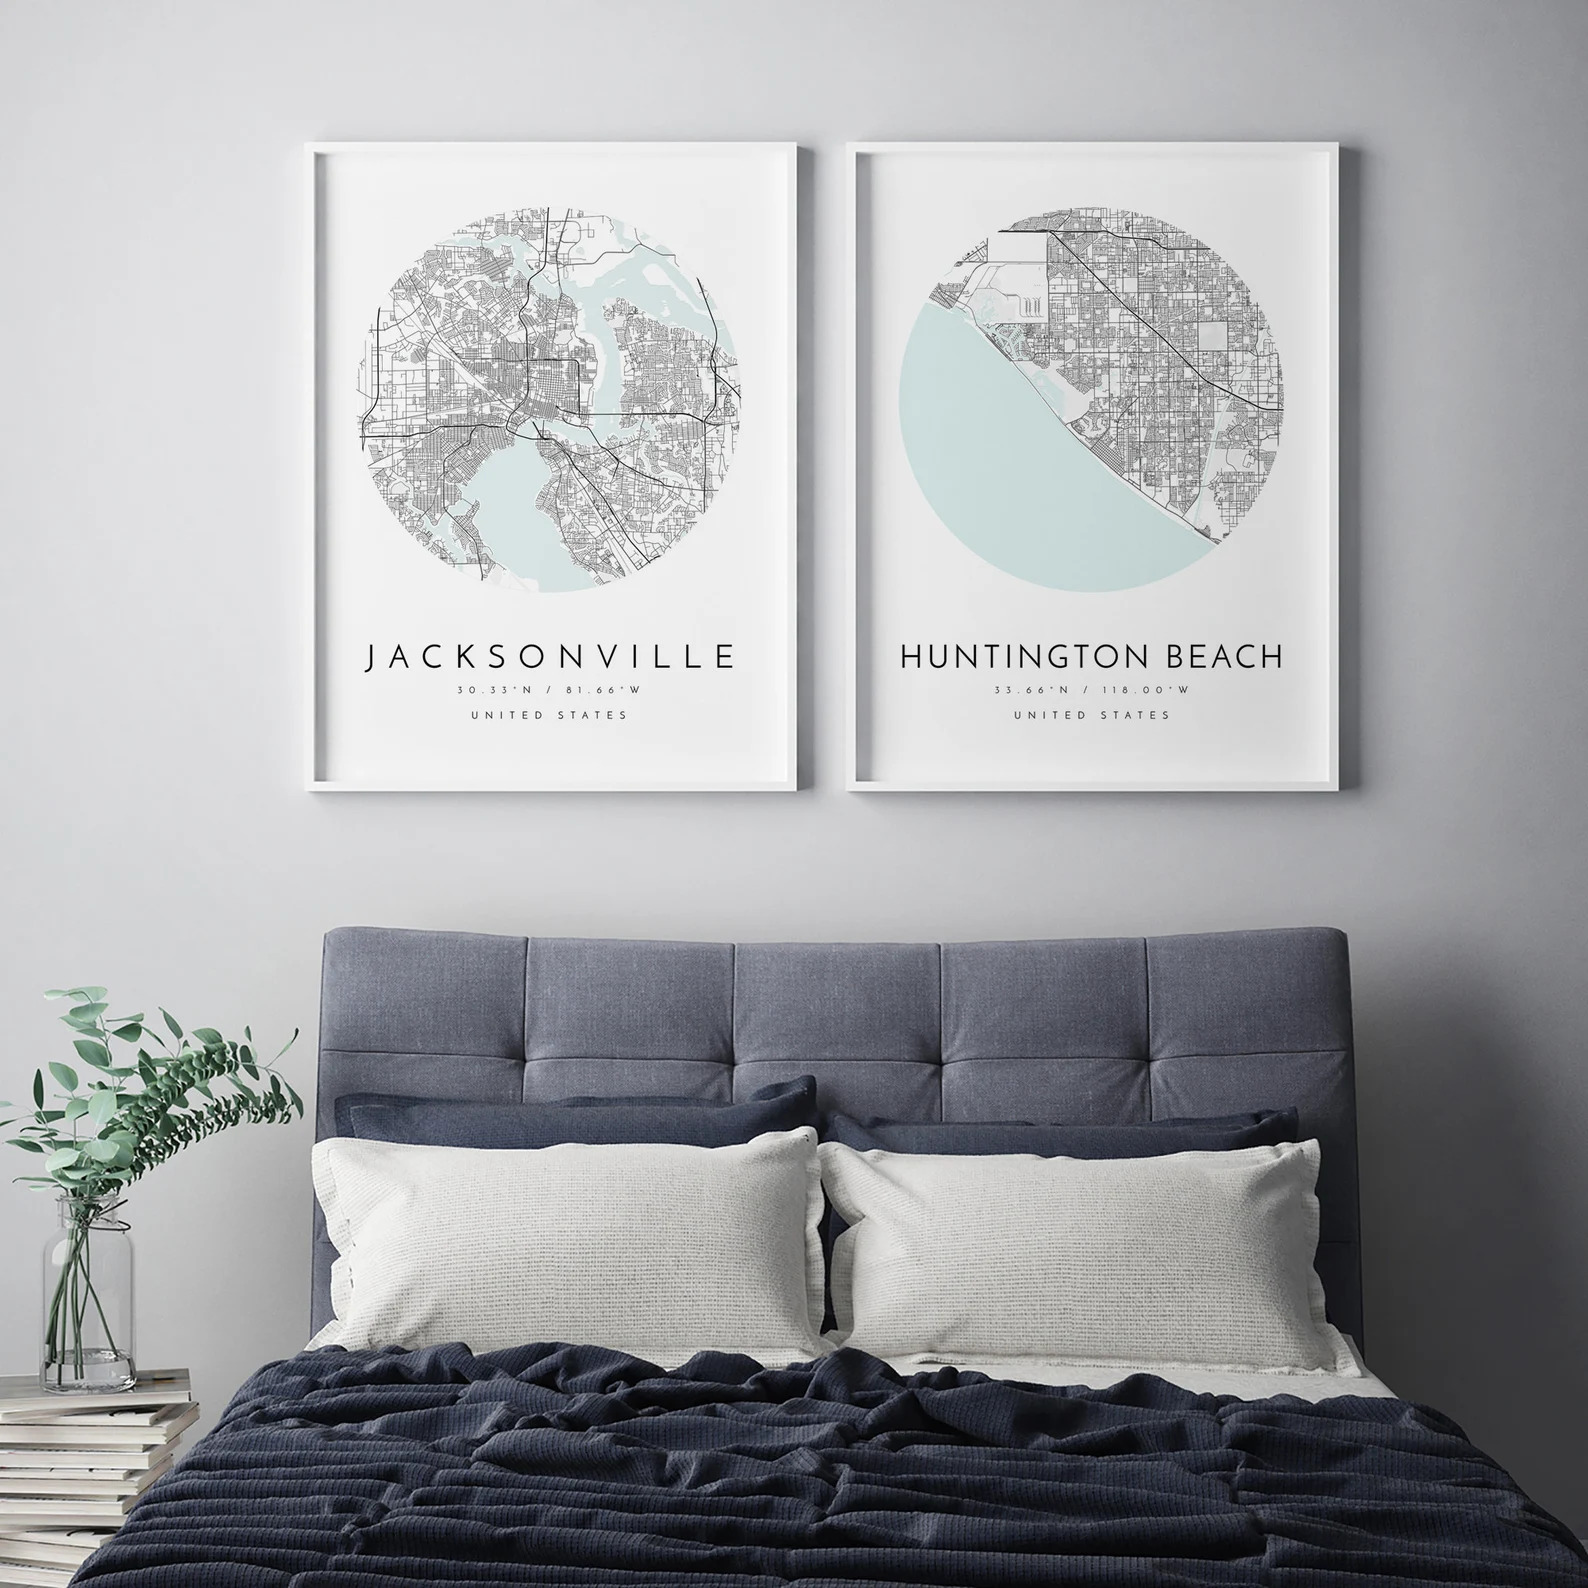 17 Personalized Wall Art Designs That Will Make Your Home Unique